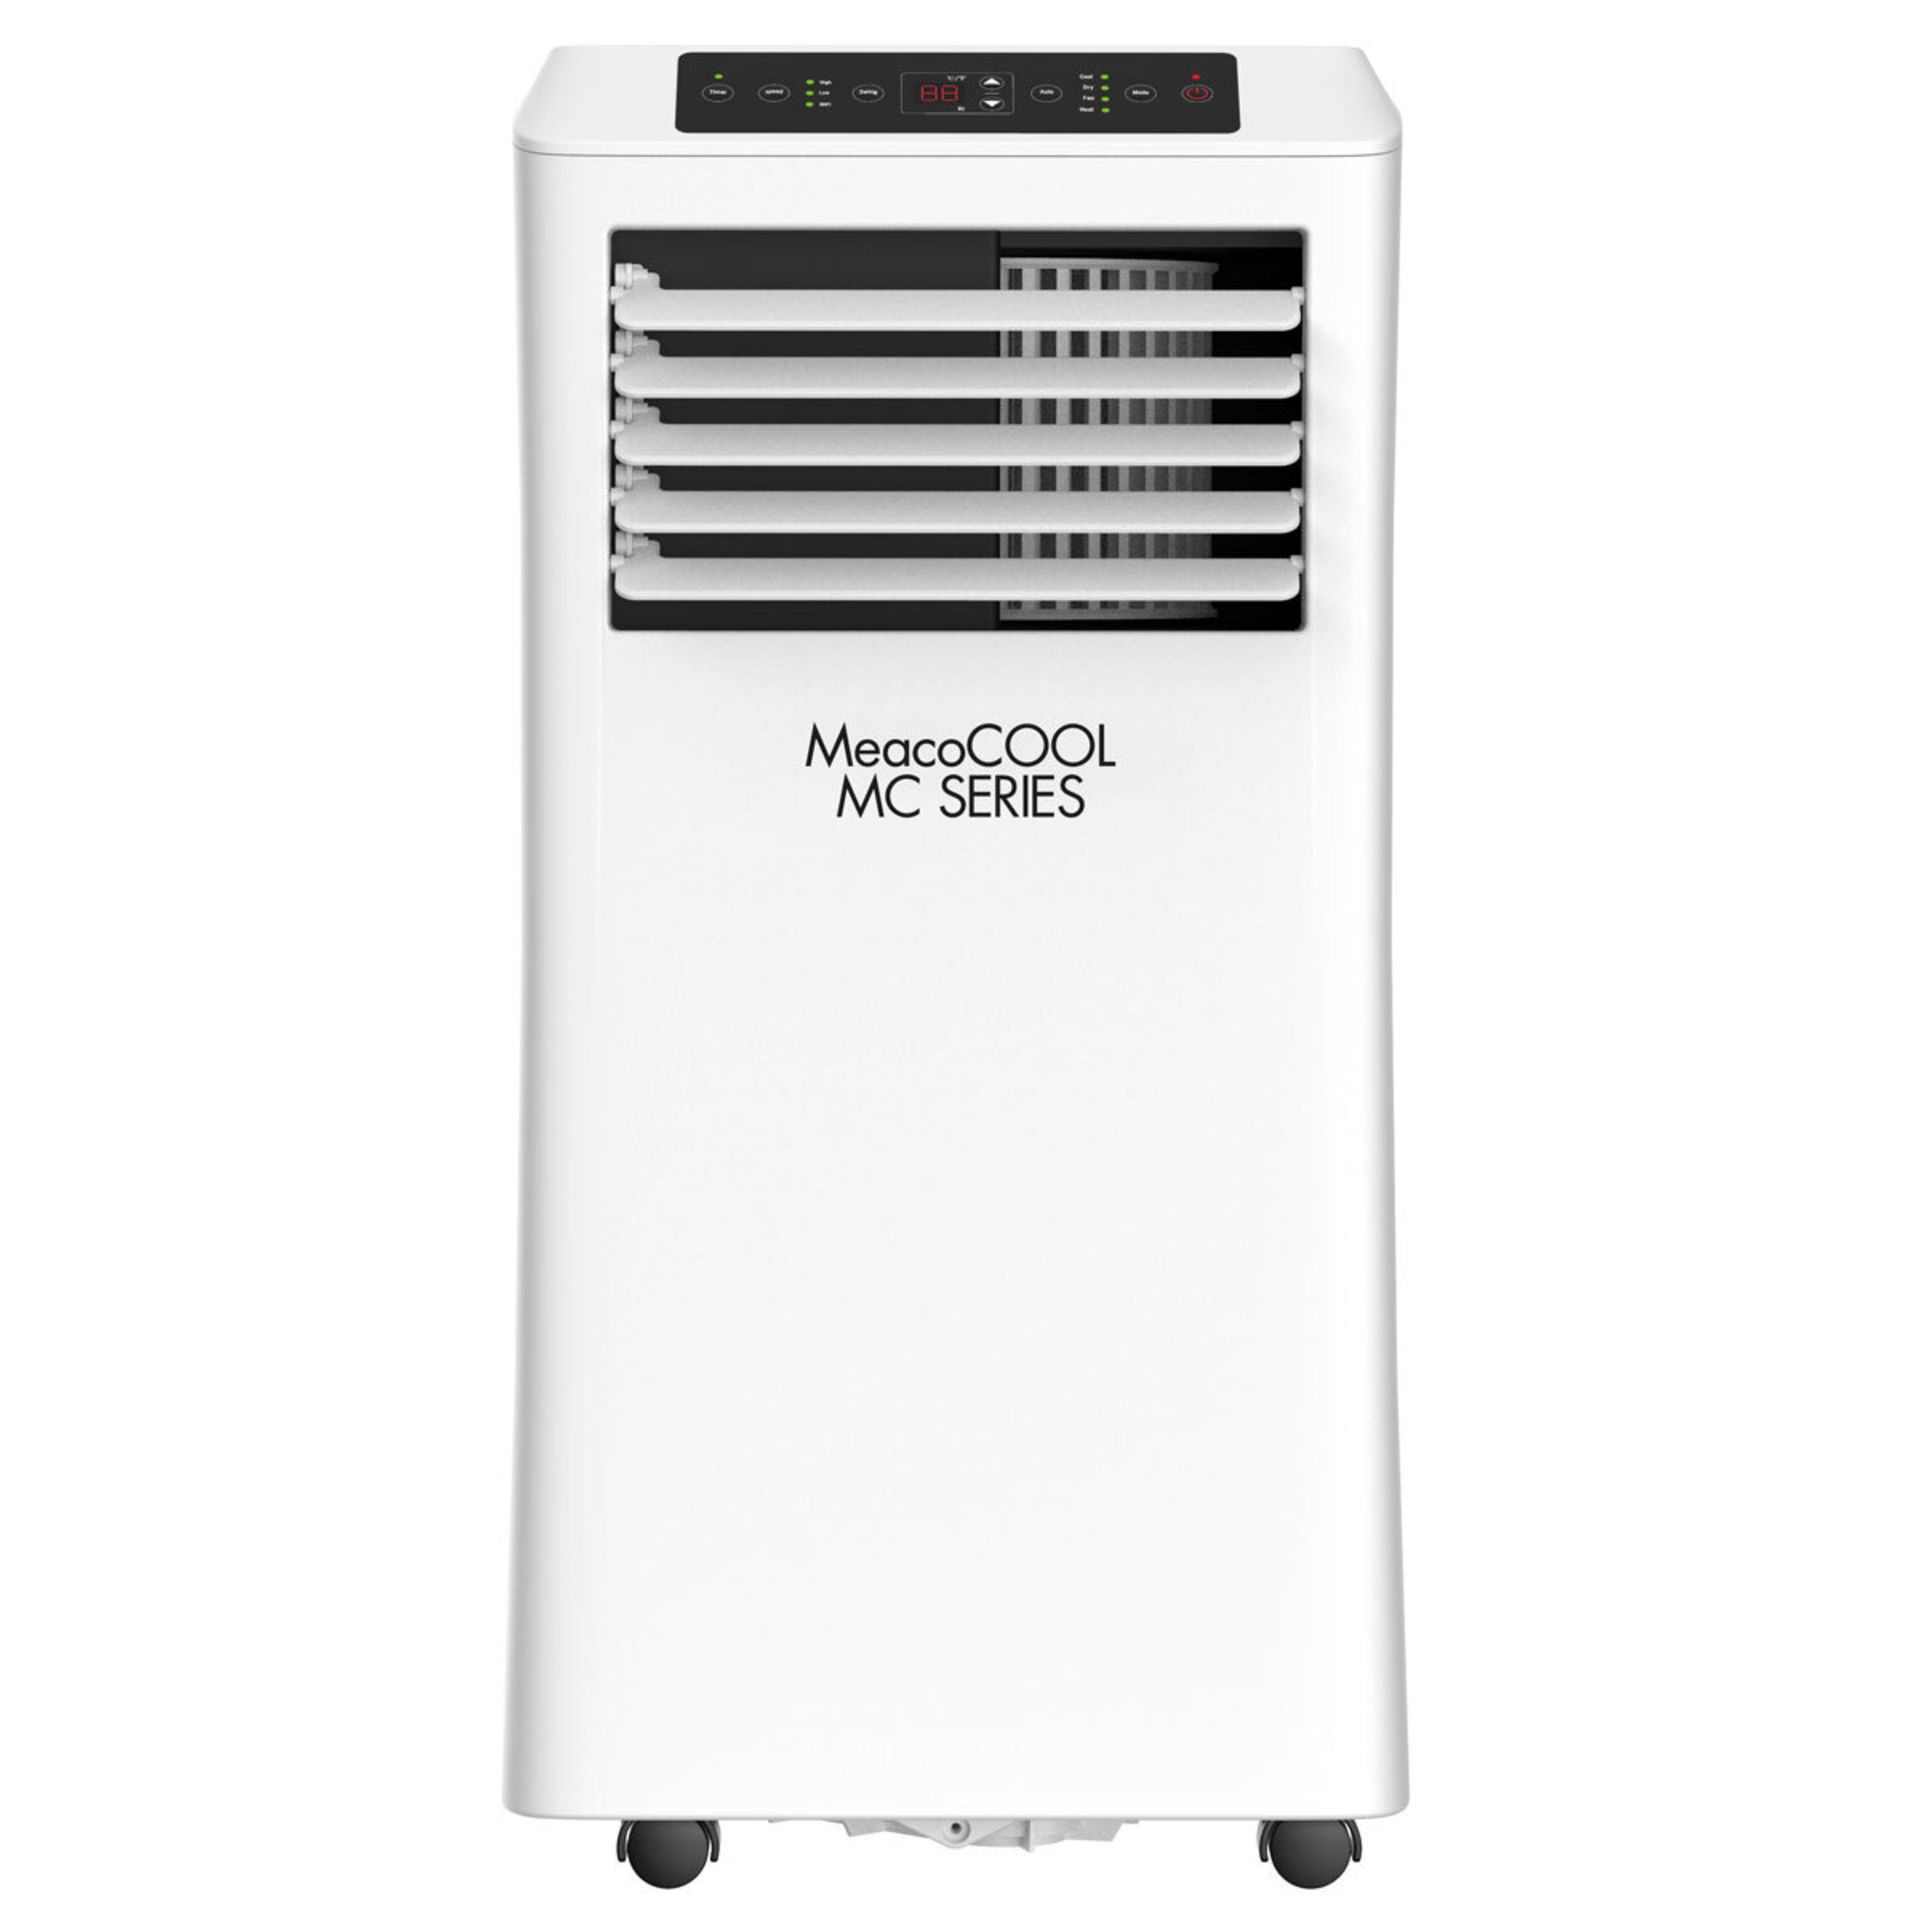 1 MEACOCOOL MC SERIES 9000 BTU PORTABLE AIR CONDITIONER HEATING & COOLING RRP Â£399